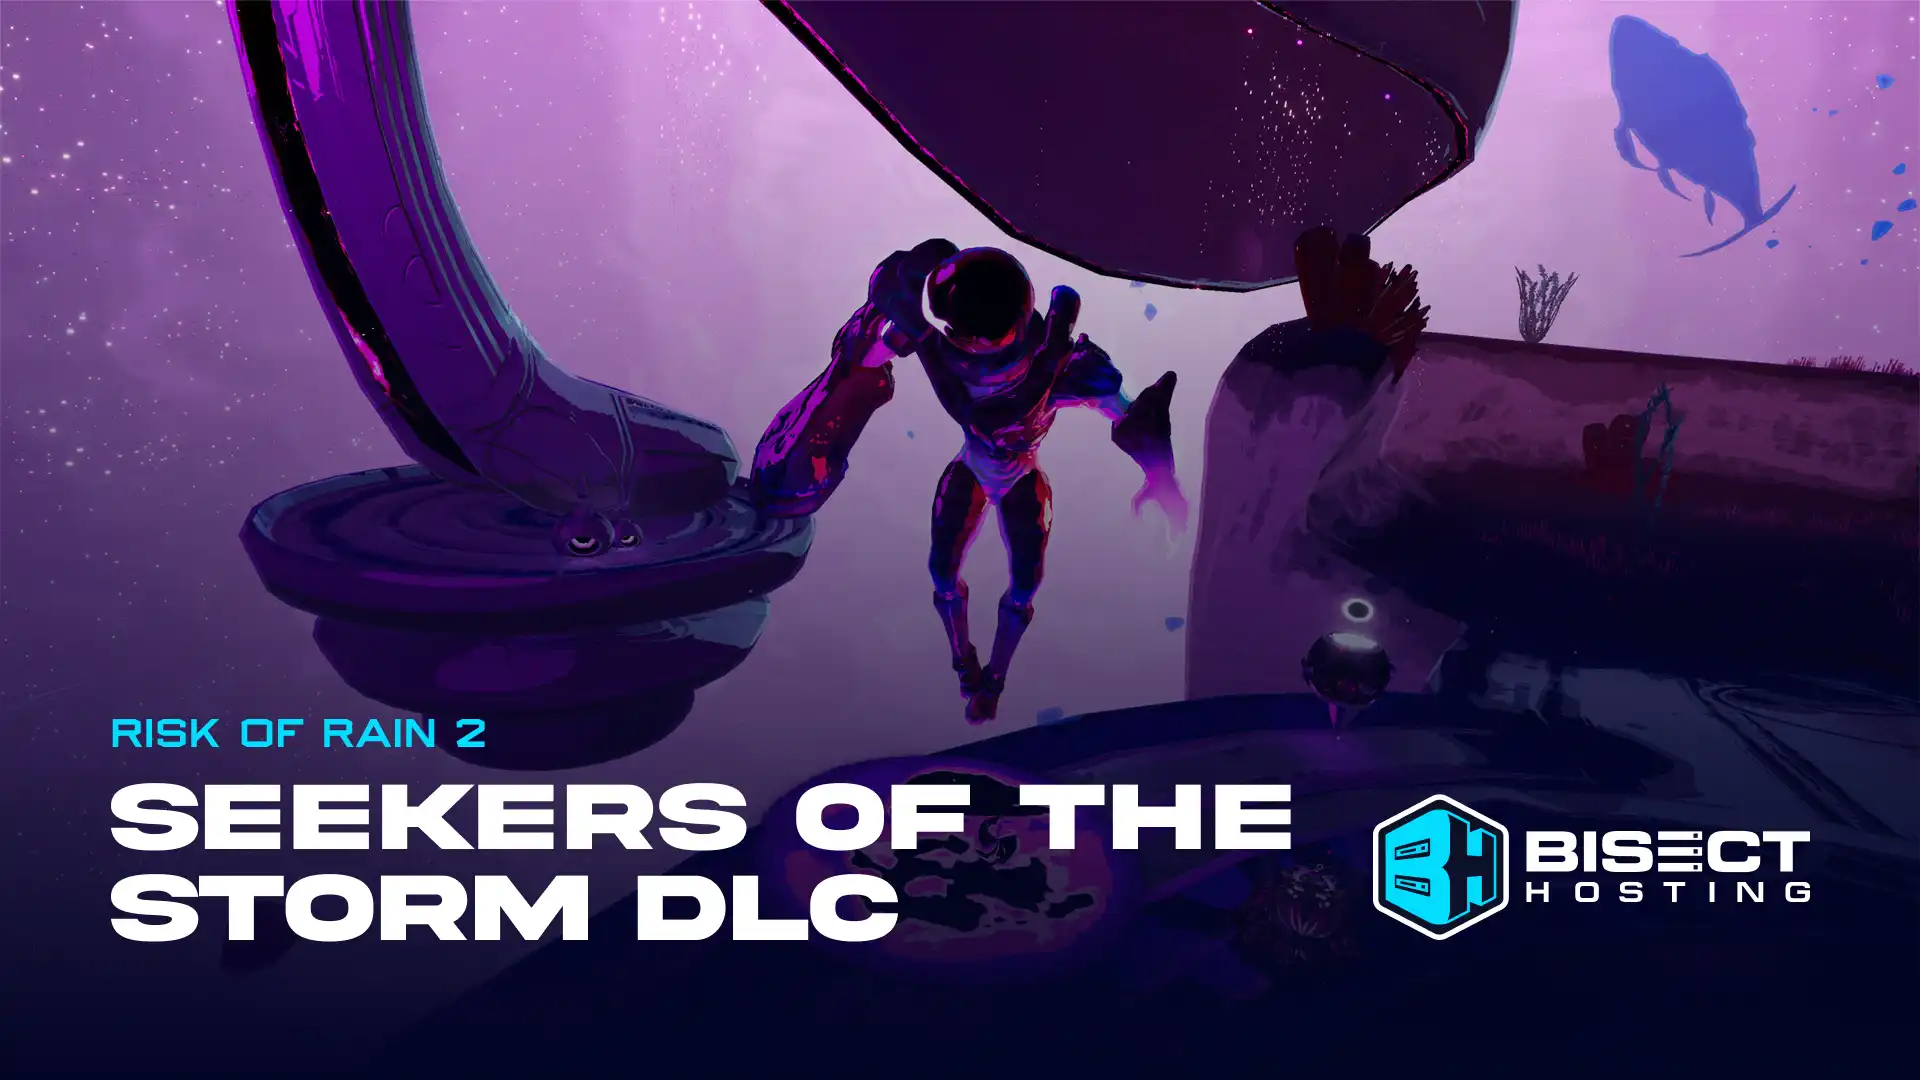 Risk of Rain 2 Seekers of the Storm DLC: Release Date Prediction, New Content, Trailers, & More